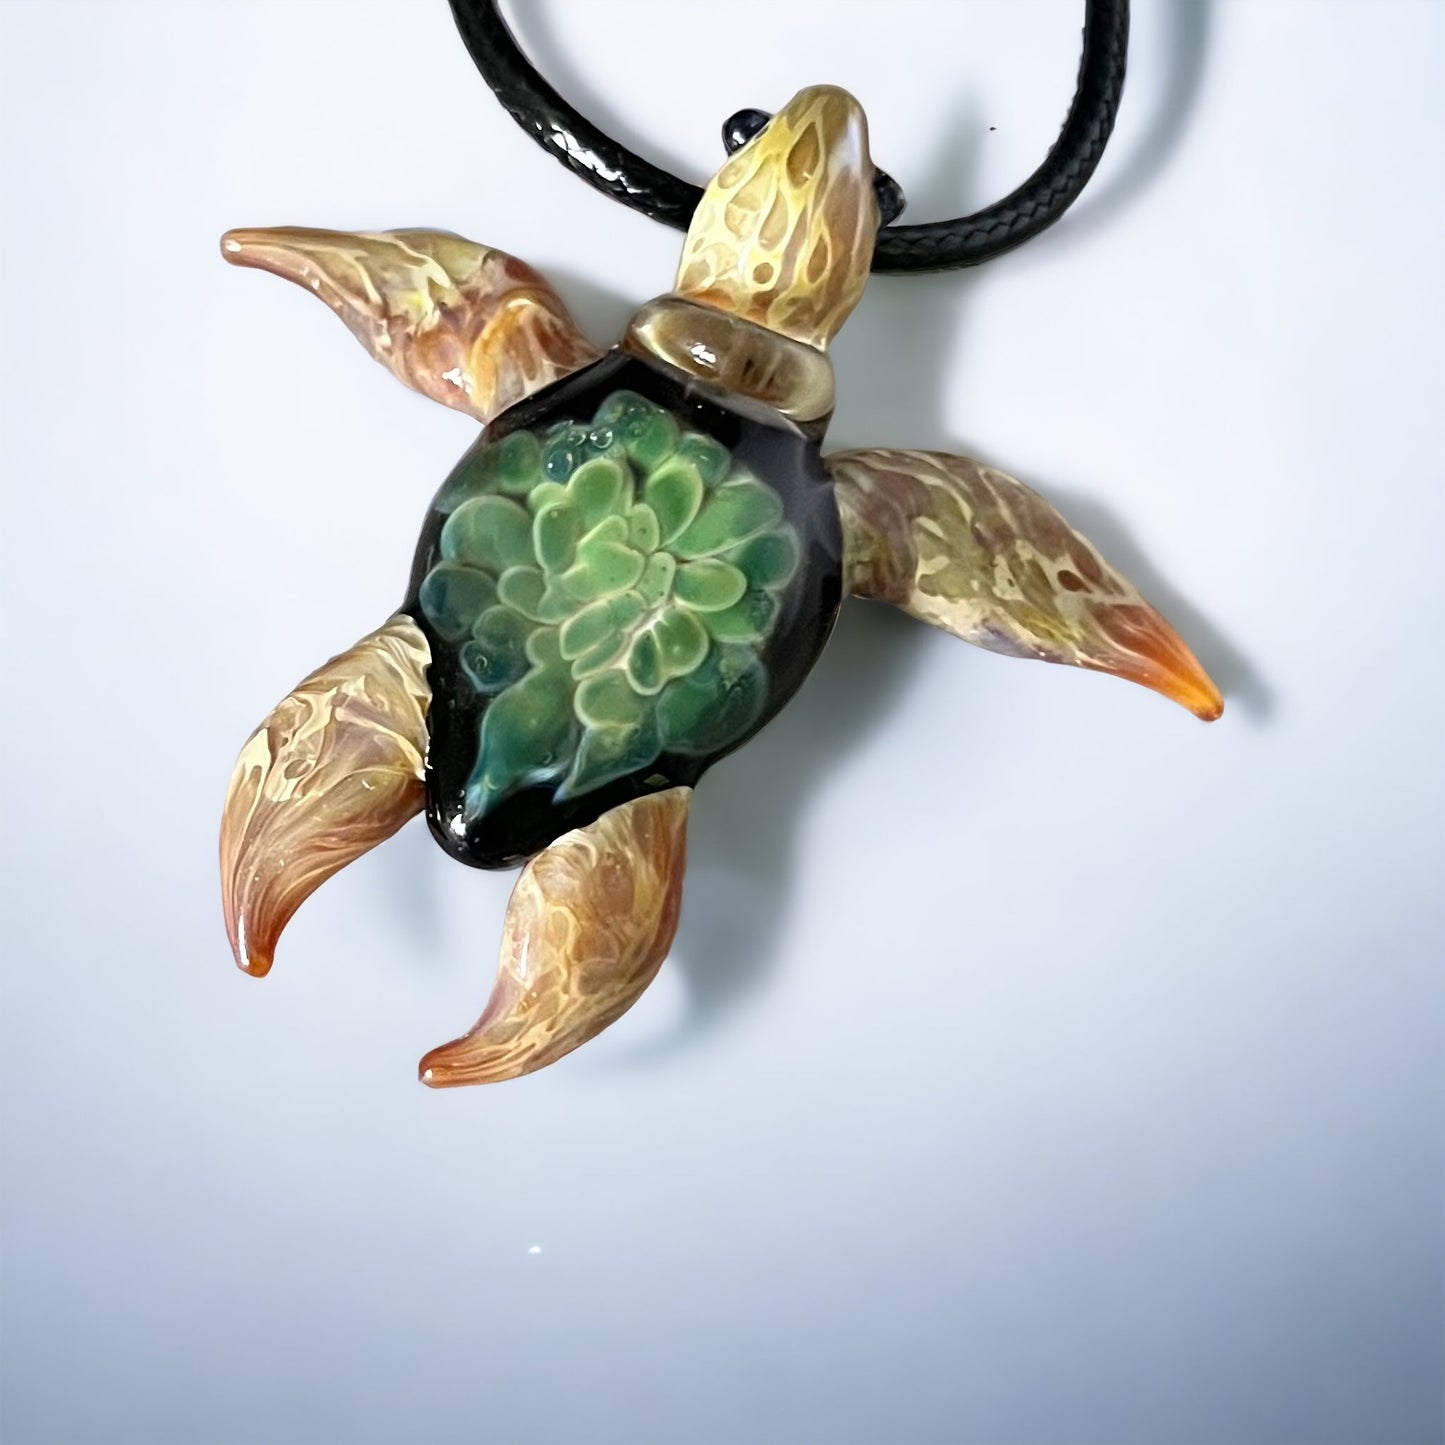 Exquisite Hawaiian Sea Turtle: Handcrafted Glass Pendant with Coral Reef Inside the Shell - GLASSnFIRE